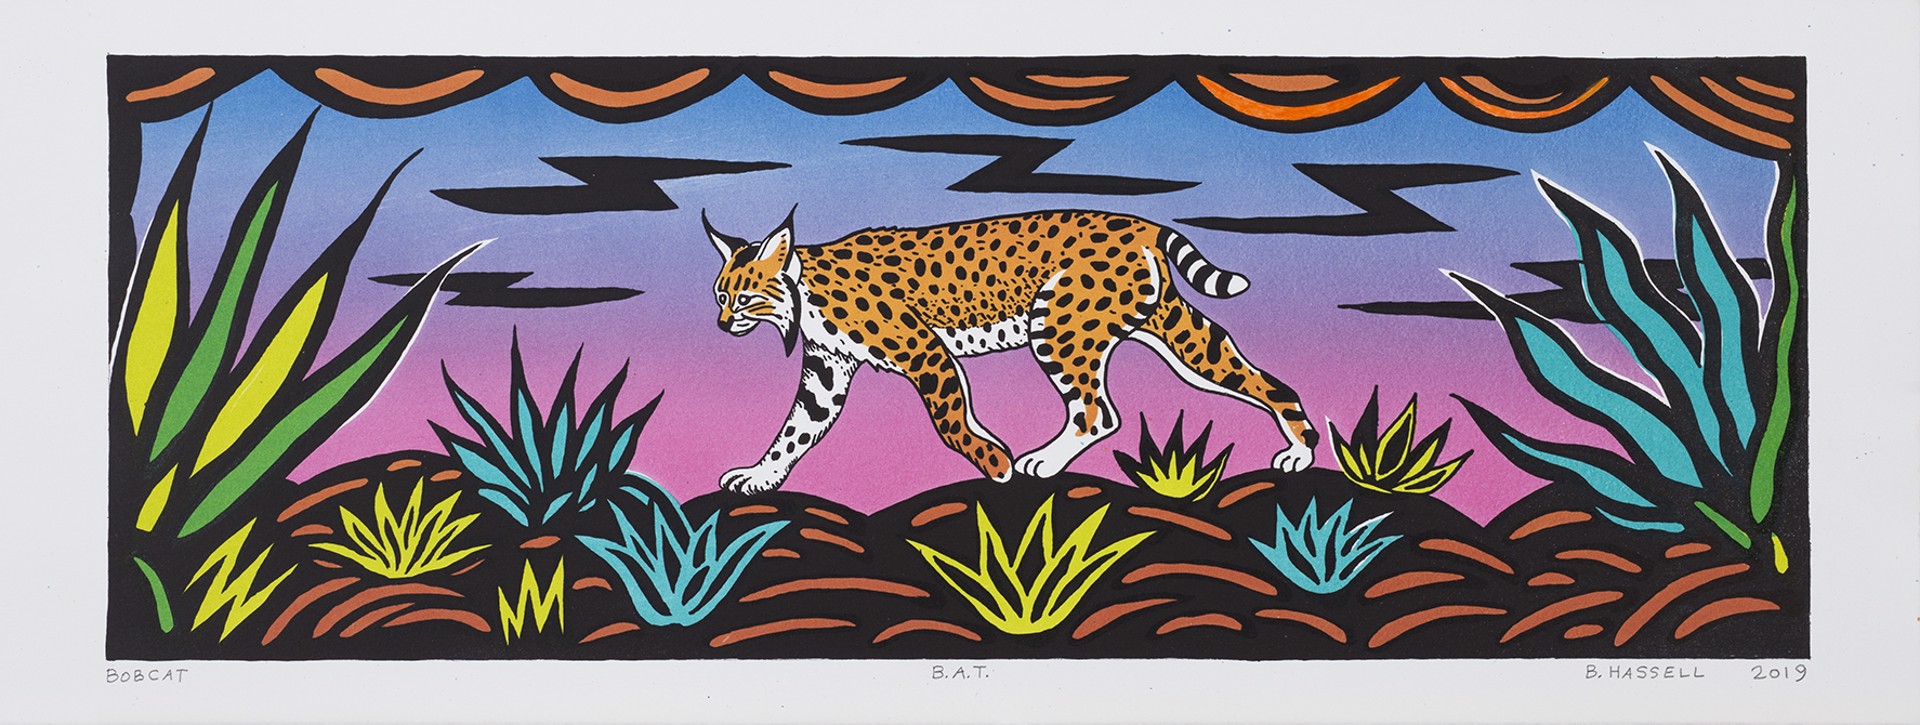 Bobcat by Billy Hassell